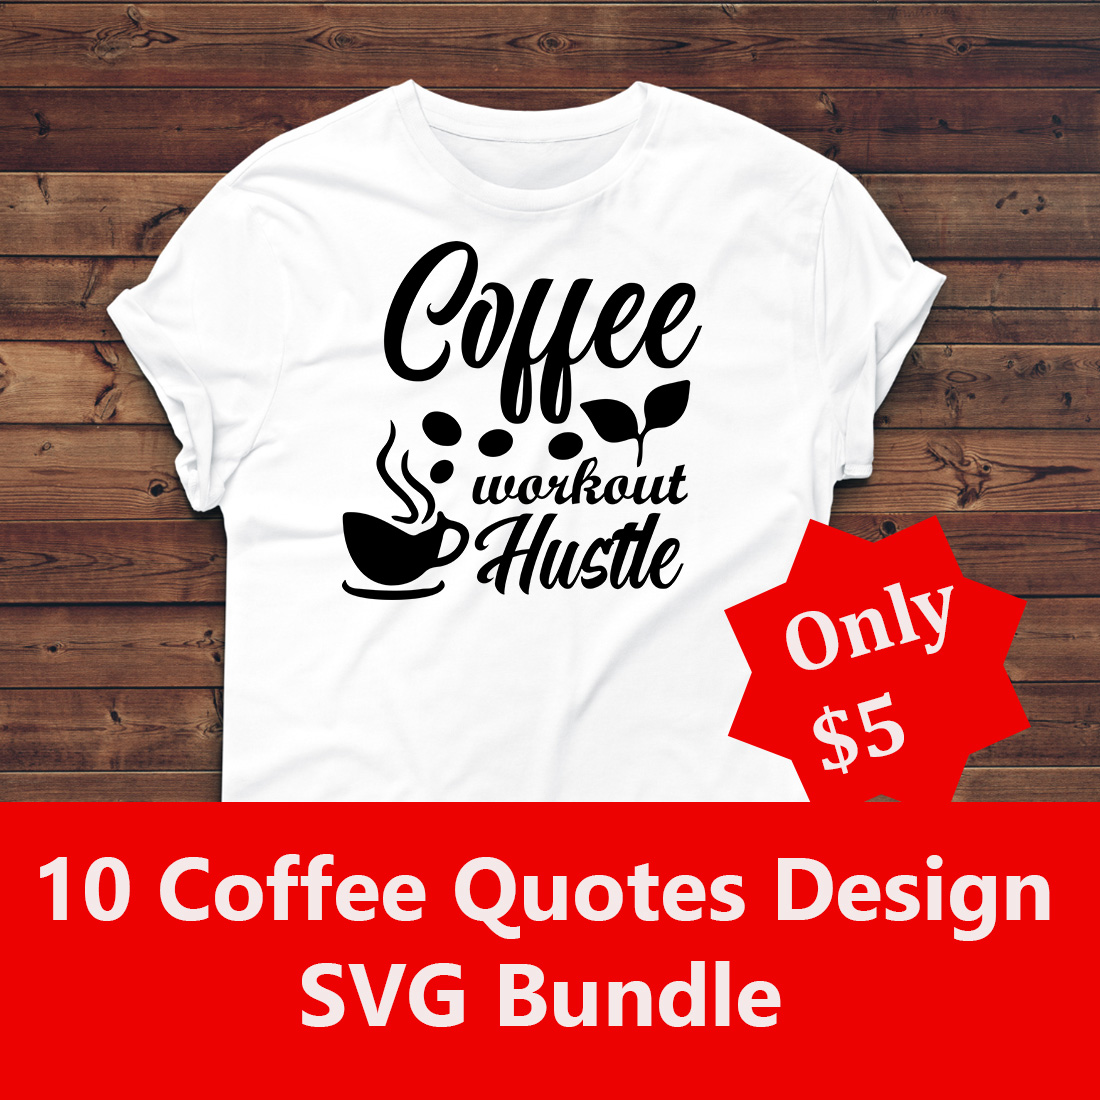 Image of a white t-shirt with exquisite slogan Coffee workout Hustle